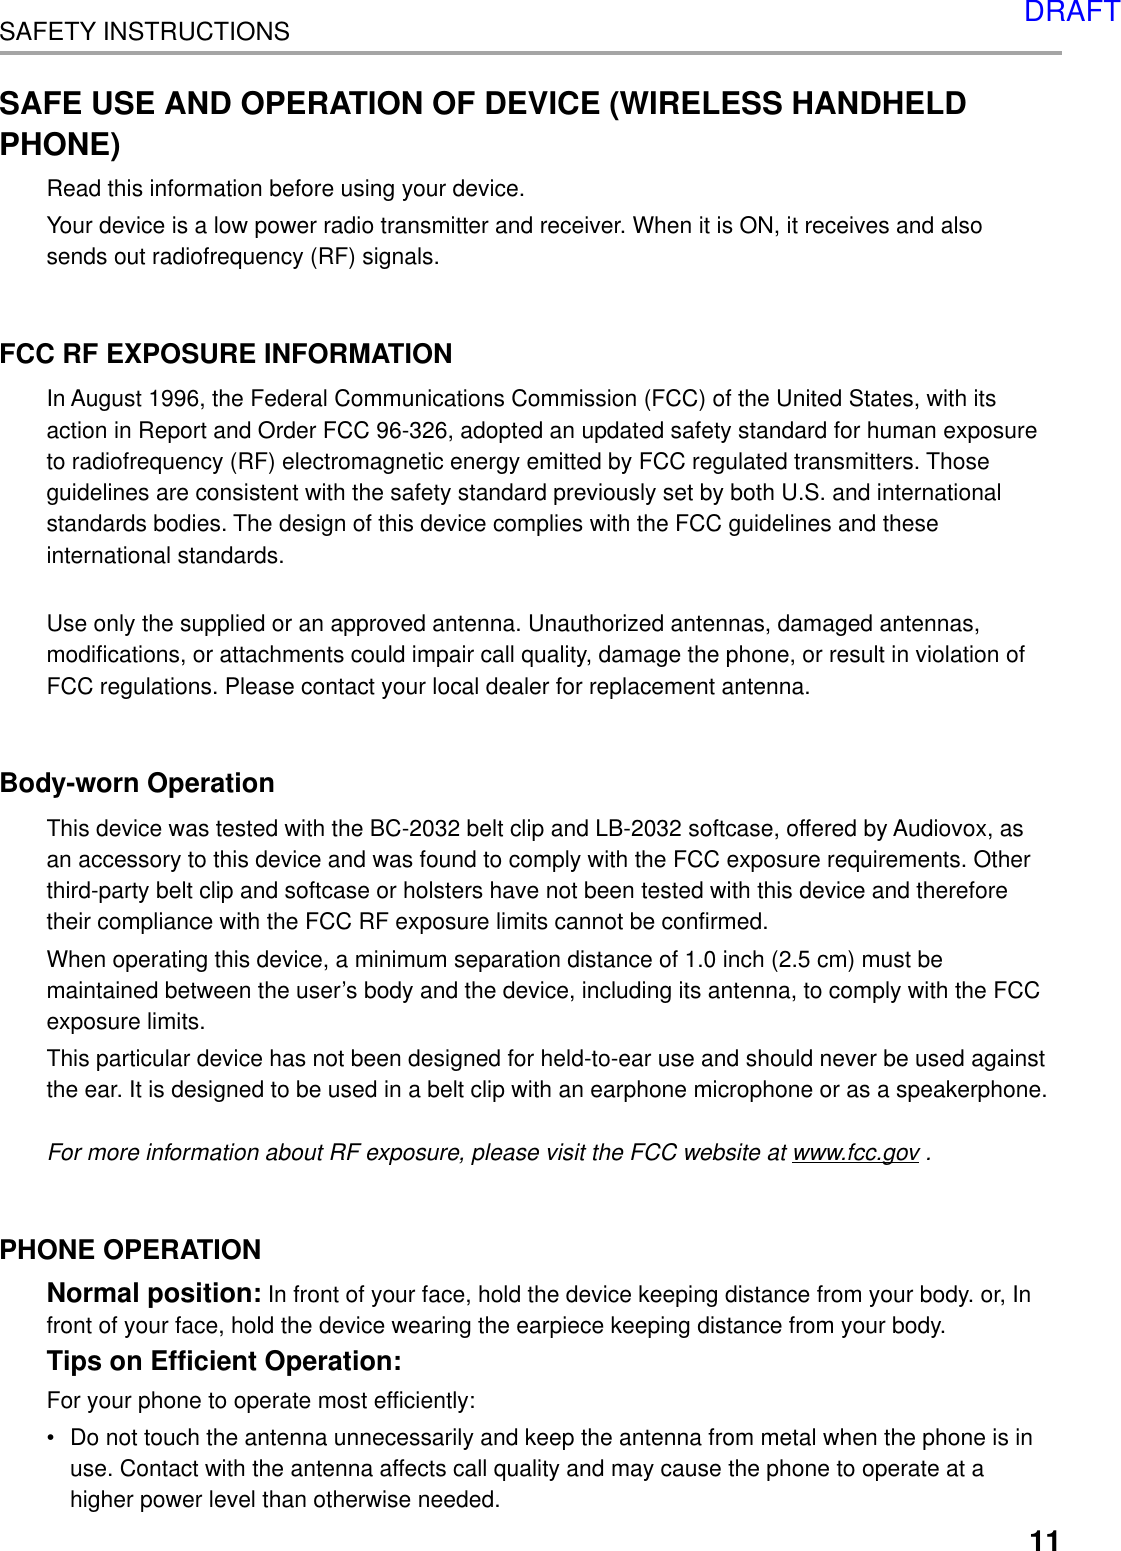 11SAFETY INSTRUCTIONSSAFE USE AND OPERATION OF DEVICE (WIRELESS HANDHELDPHONE)Read this information before using your device.Your device is a low power radio transmitter and receiver. When it is ON, it receives and alsosends out radiofrequency (RF) signals.FCC RF EXPOSURE INFORMATIONIn August 1996, the Federal Communications Commission (FCC) of the United States, with itsaction in Report and Order FCC 96-326, adopted an updated safety standard for human exposureto radiofrequency (RF) electromagnetic energy emitted by FCC regulated transmitters. Thoseguidelines are consistent with the safety standard previously set by both U.S. and internationalstandards bodies. The design of this device complies with the FCC guidelines and theseinternational standards.Use only the supplied or an approved antenna. Unauthorized antennas, damaged antennas,modifications, or attachments could impair call quality, damage the phone, or result in violation ofFCC regulations. Please contact your local dealer for replacement antenna.Body-worn OperationThis device was tested with the BC-2032 belt clip and LB-2032 softcase, offered by Audiovox, asan accessory to this device and was found to comply with the FCC exposure requirements. Otherthird-party belt clip and softcase or holsters have not been tested with this device and thereforetheir compliance with the FCC RF exposure limits cannot be confirmed.When operating this device, a minimum separation distance of 1.0 inch (2.5 cm) must bemaintained between the user’s body and the device, including its antenna, to comply with the FCCexposure limits.This particular device has not been designed for held-to-ear use and should never be used againstthe ear. It is designed to be used in a belt clip with an earphone microphone or as a speakerphone.For more information about RF exposure, please visit the FCC website at www.fcc.gov .PHONE OPERATIONNormal position: In front of your face, hold the device keeping distance from your body. or, Infront of your face, hold the device wearing the earpiece keeping distance from your body.Tips on Efficient Operation:For your phone to operate most efficiently:•Do not touch the antenna unnecessarily and keep the antenna from metal when the phone is inuse. Contact with the antenna affects call quality and may cause the phone to operate at ahigher power level than otherwise needed.DRAFT